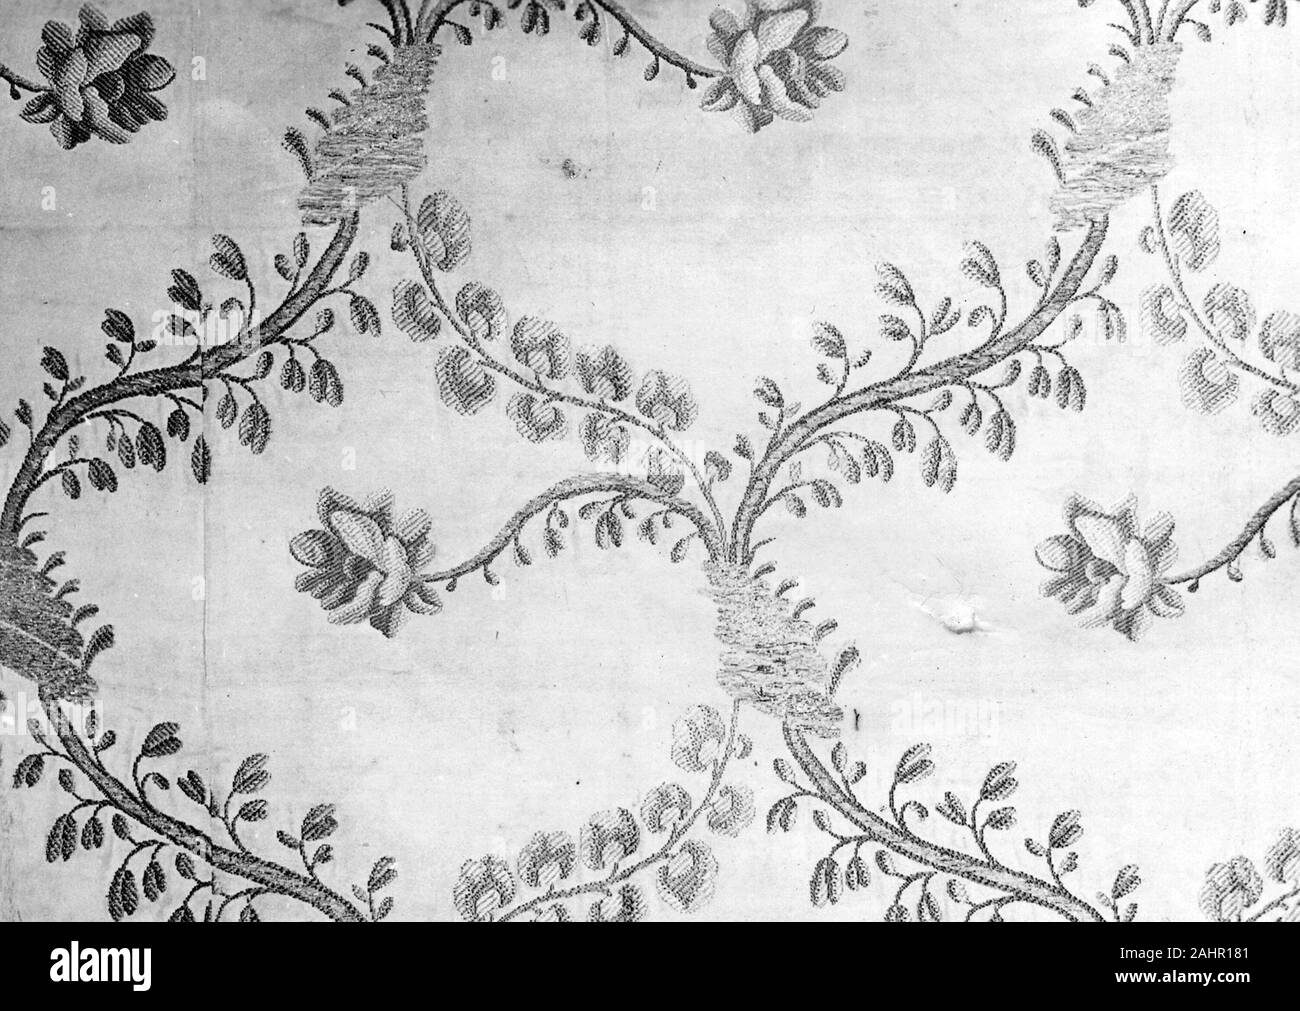 Panel. 1732–1752. Spitalfields. Silk, gold-gilt strip, and gold-gilt-strip-wound-around-a-silk-fiber core, warp-float faced 7 1 satin weave with supplementary brocading wefts bound in 3 1 twill interlacing Stock Photo